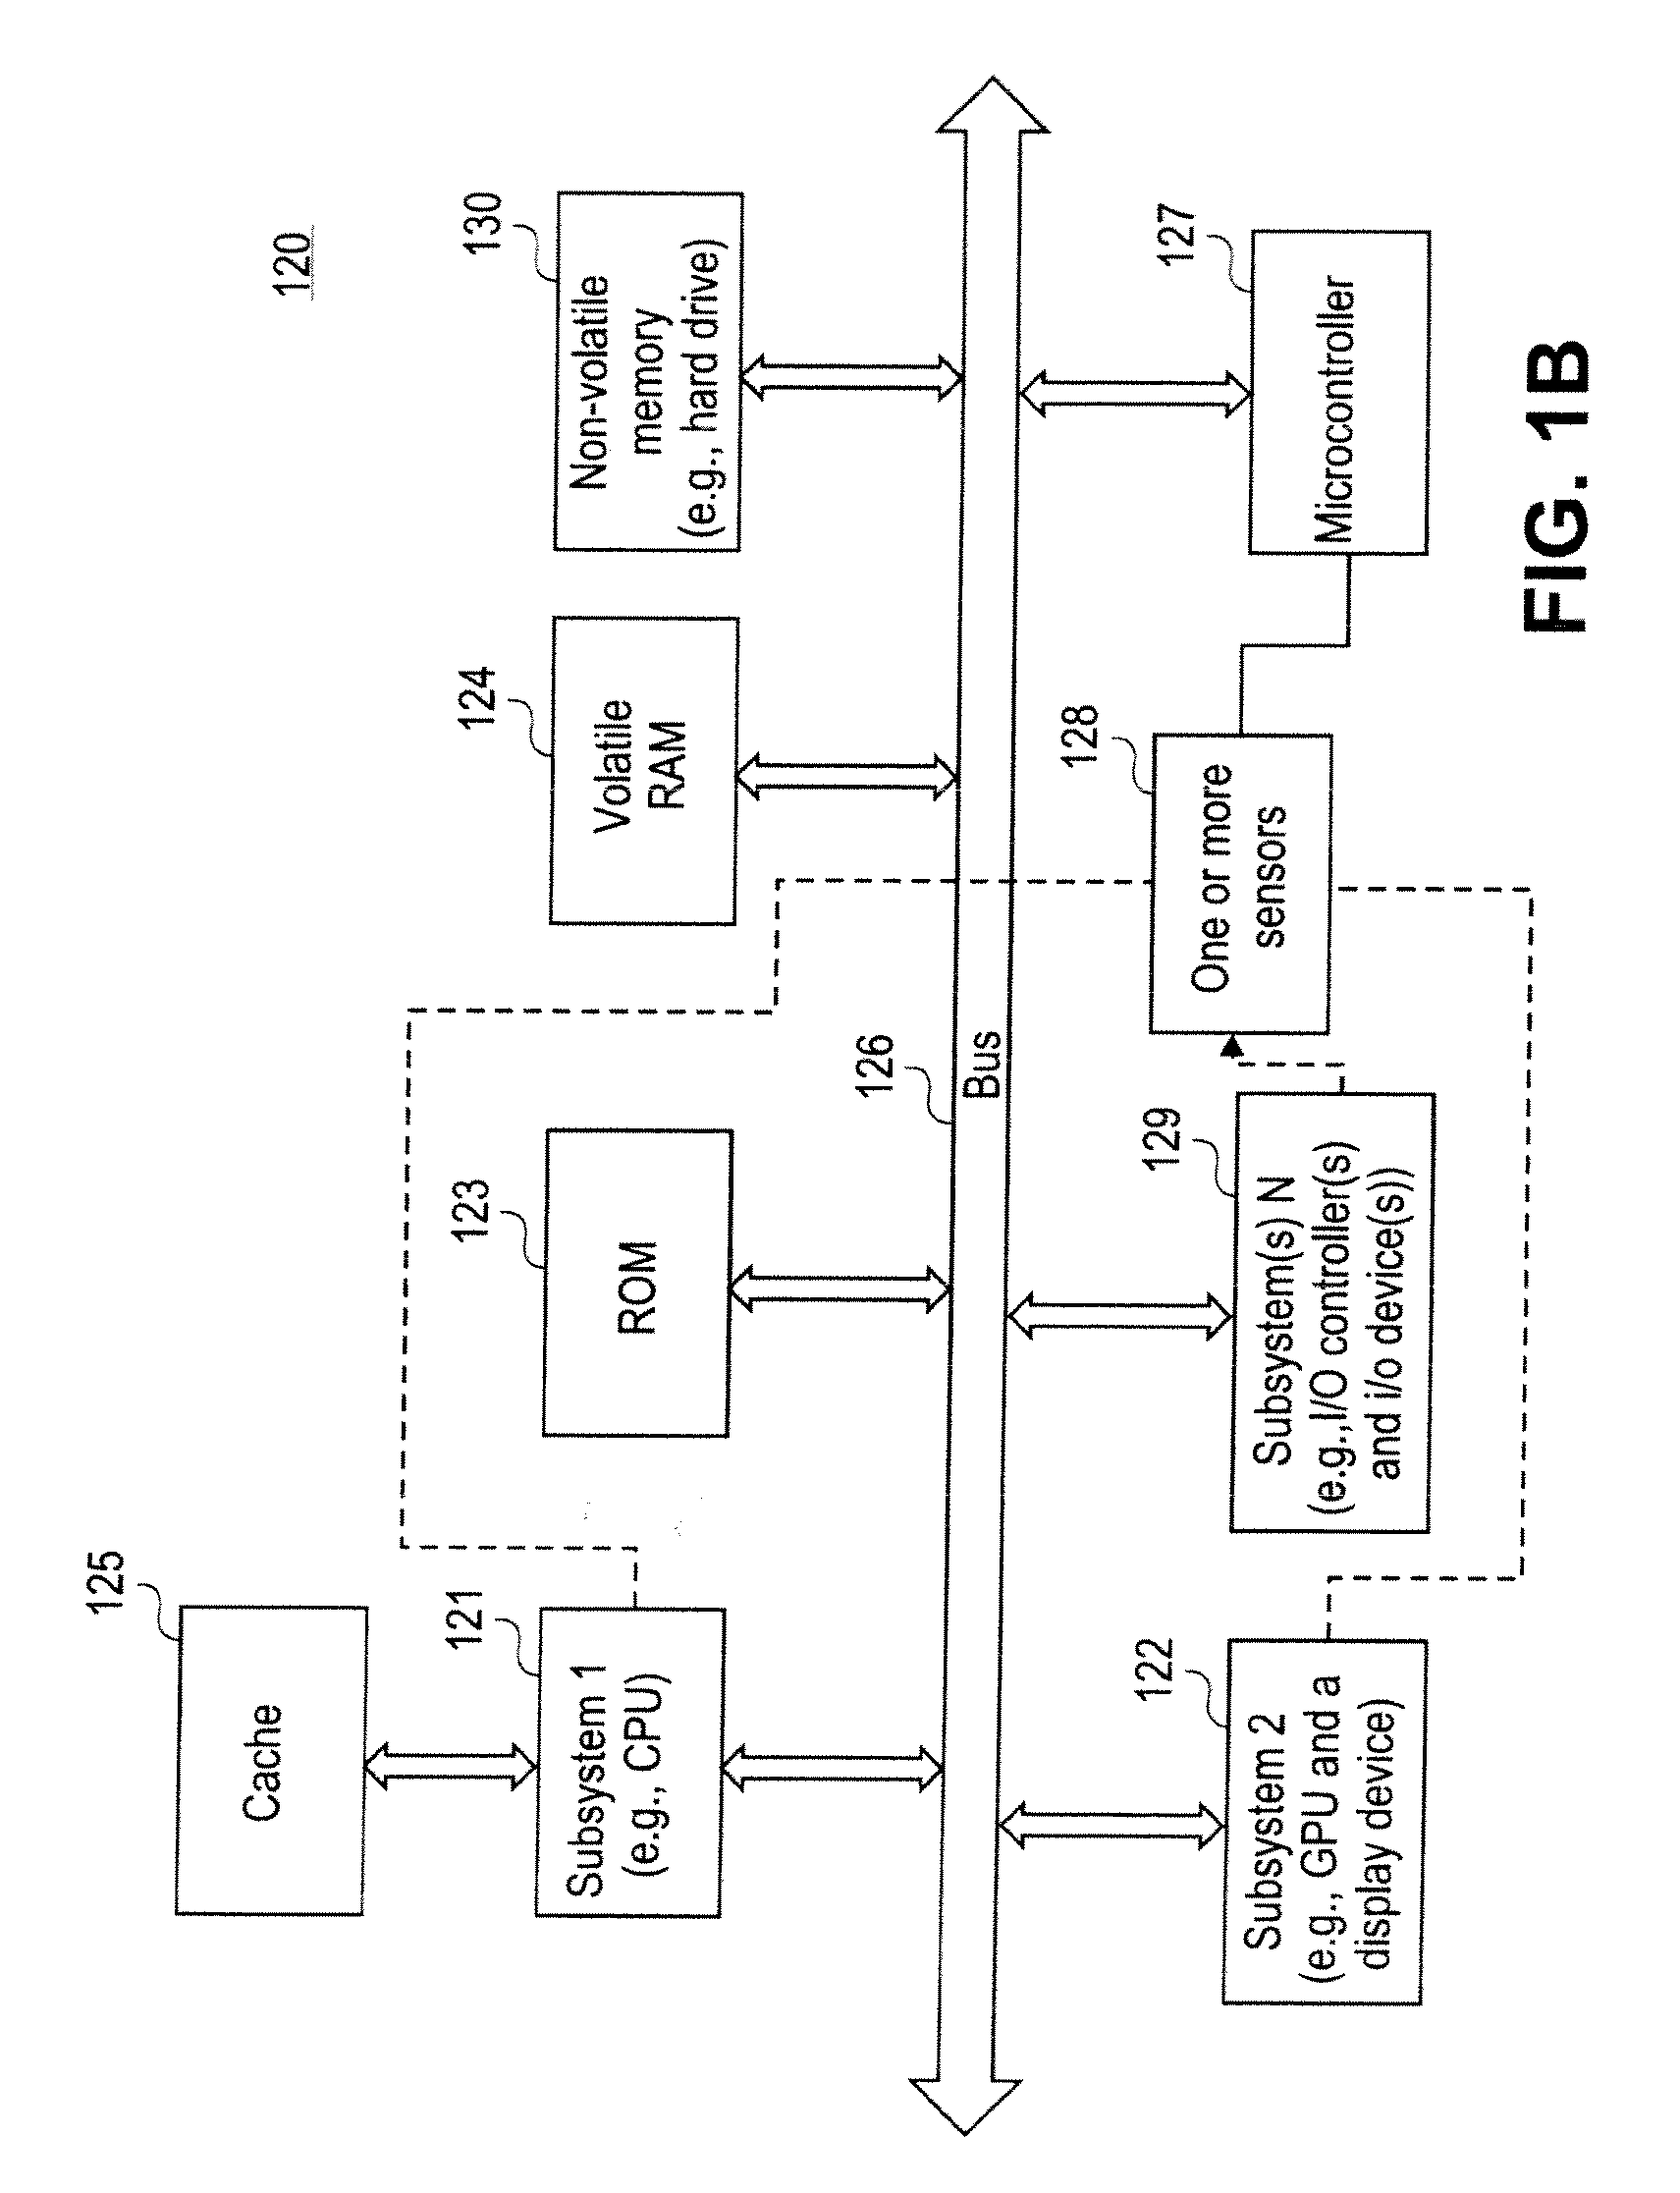 Forced idle of a data processing system